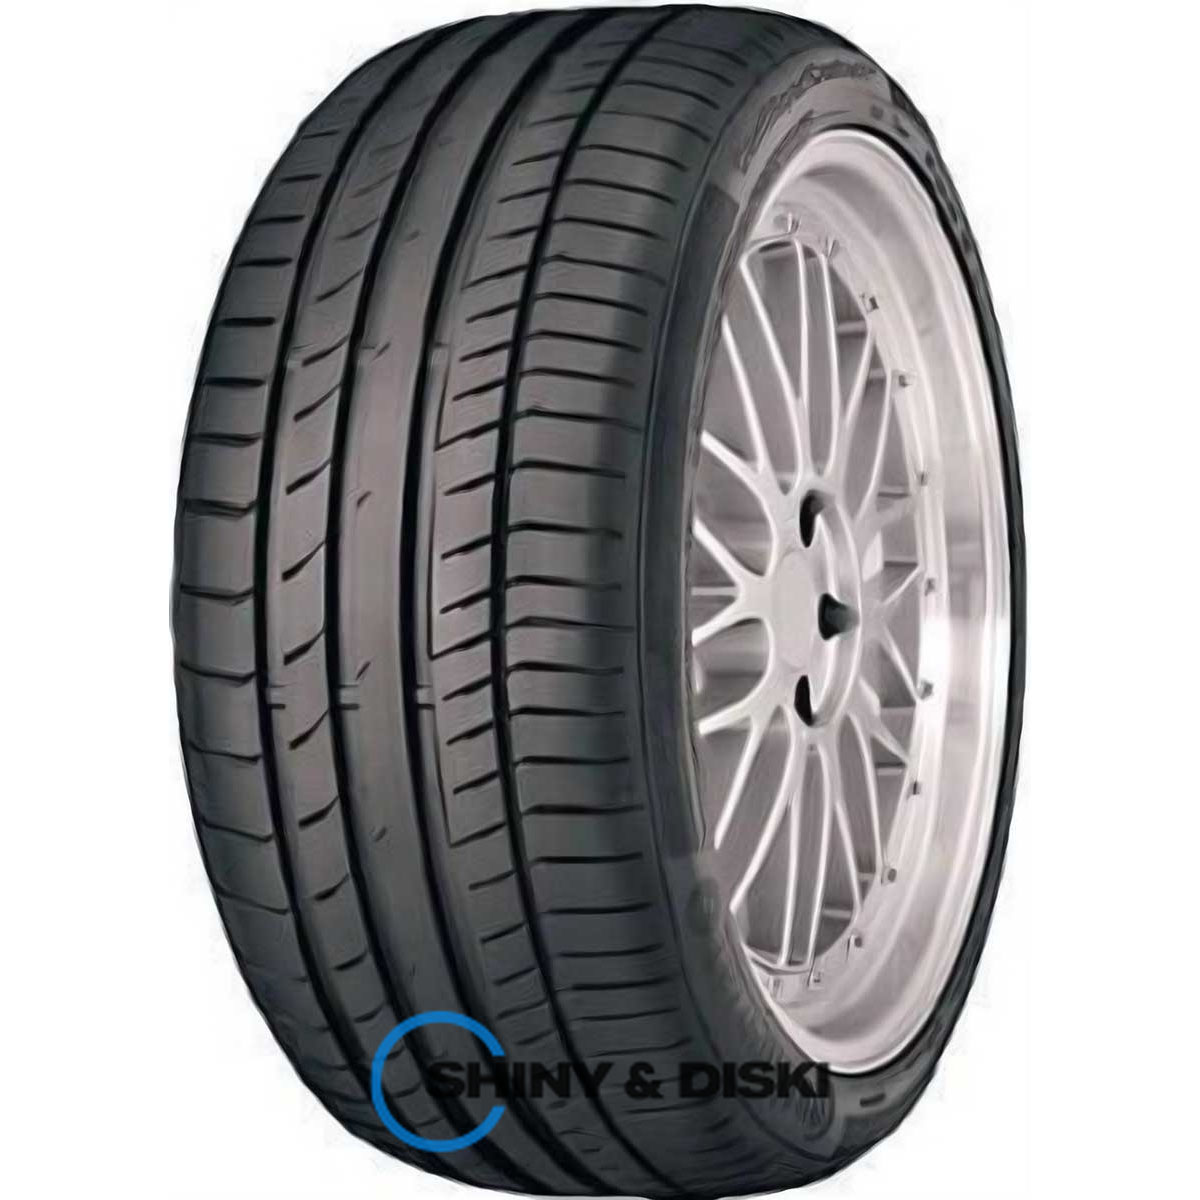 continental sportcontact 5p 265/30 r20 94y xl fr ro1 conti silent